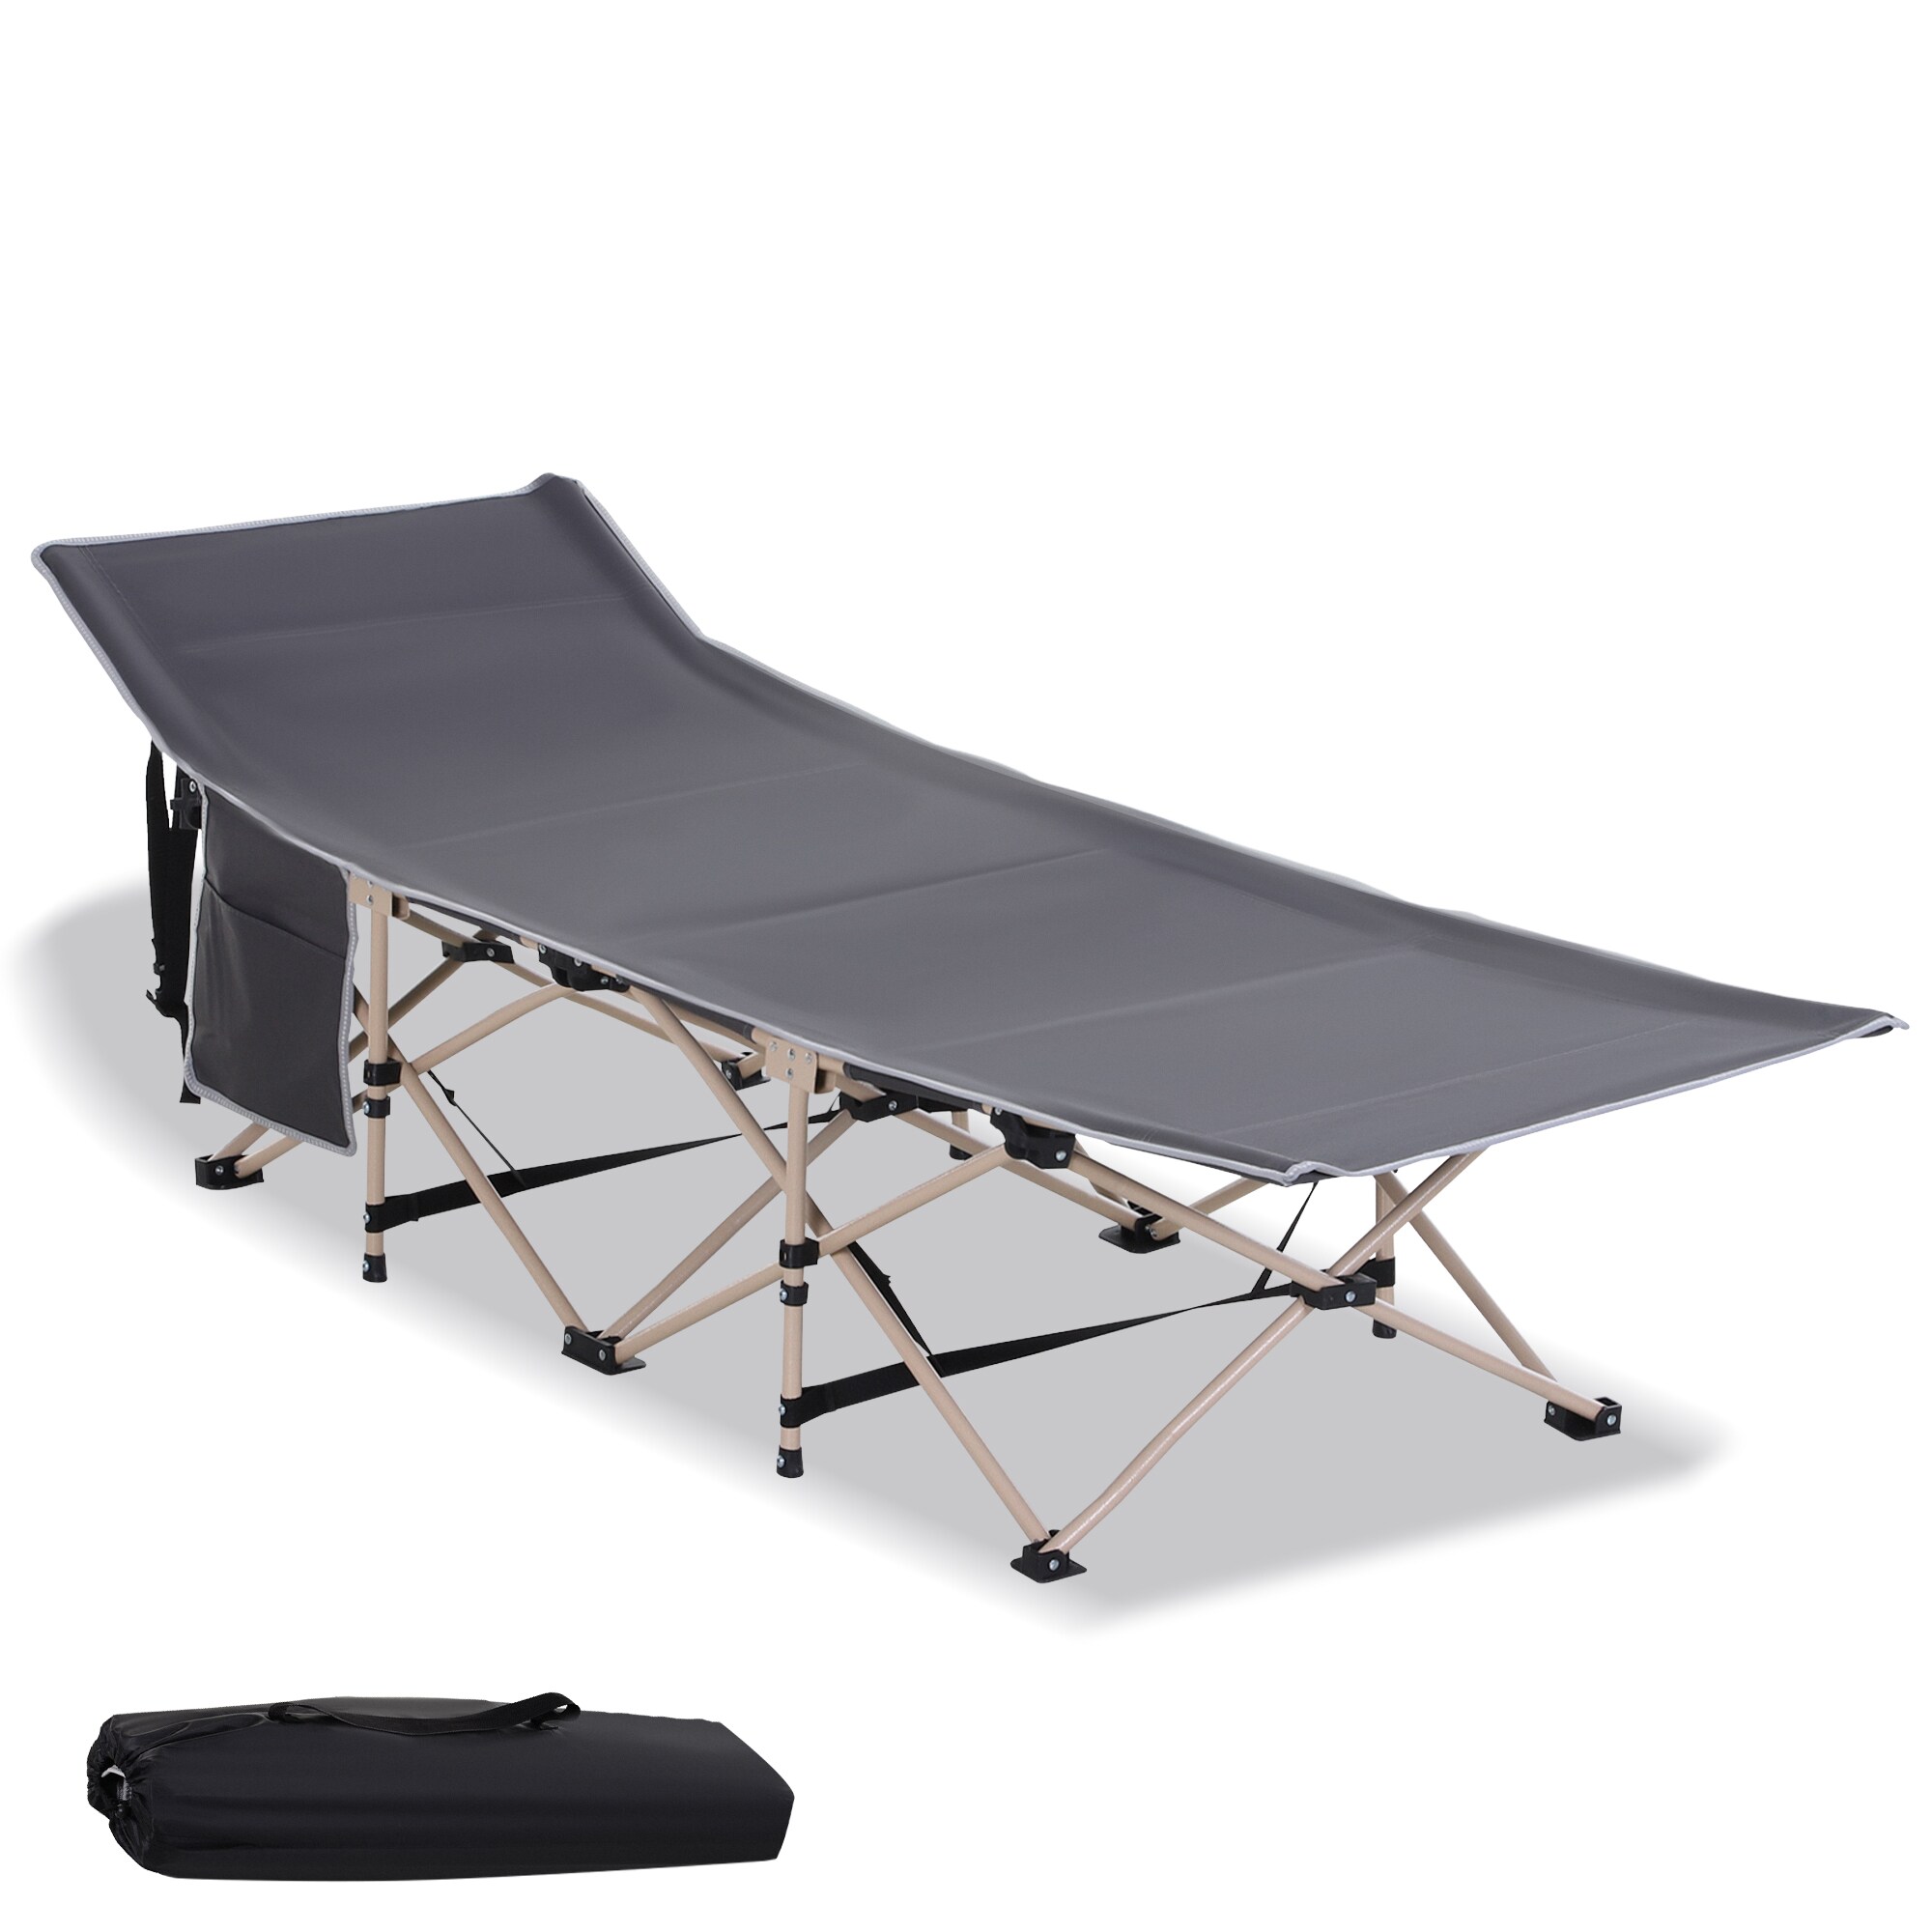 Oeyal Camping Cot Folding Camping Bed for Adults Travel Military Portable Cots Bed with Carry Bag for Indoor & Outdoor Use Heavy Duty Collapsible Sleeping Bed 